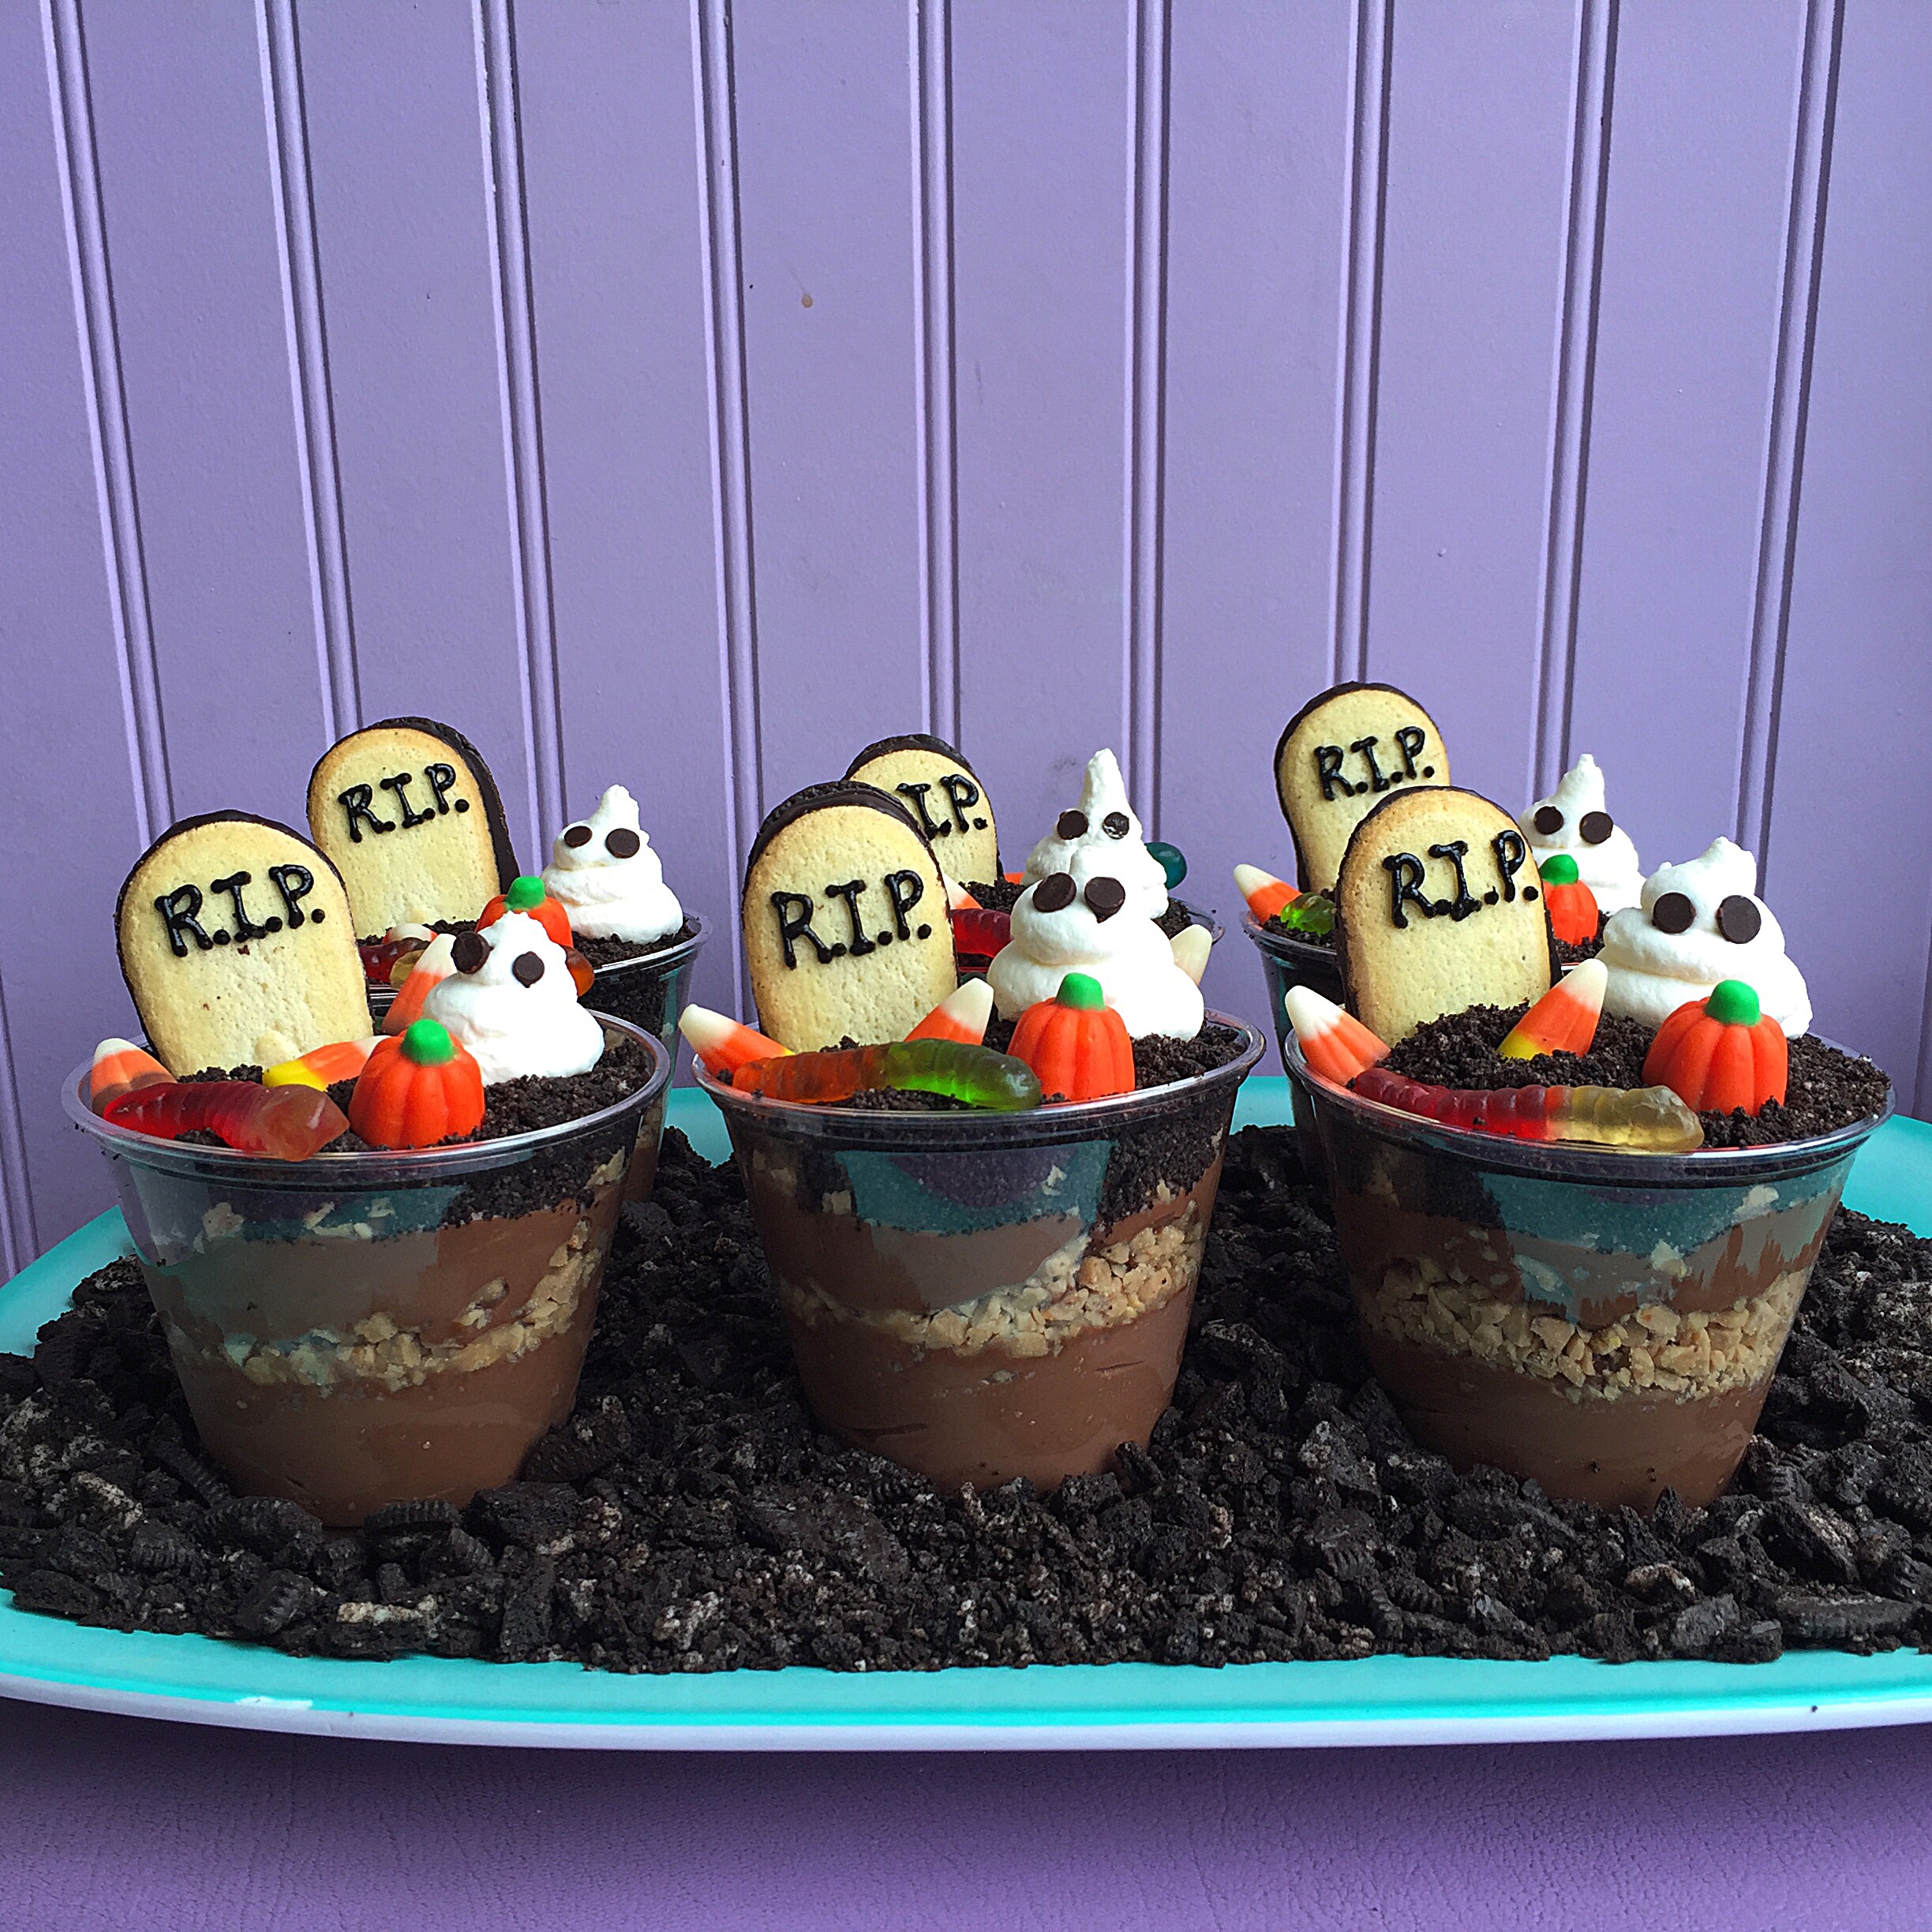 Homemade Oreo Desserts: Gummy Worms & Dirt Cake in Edible Bowls